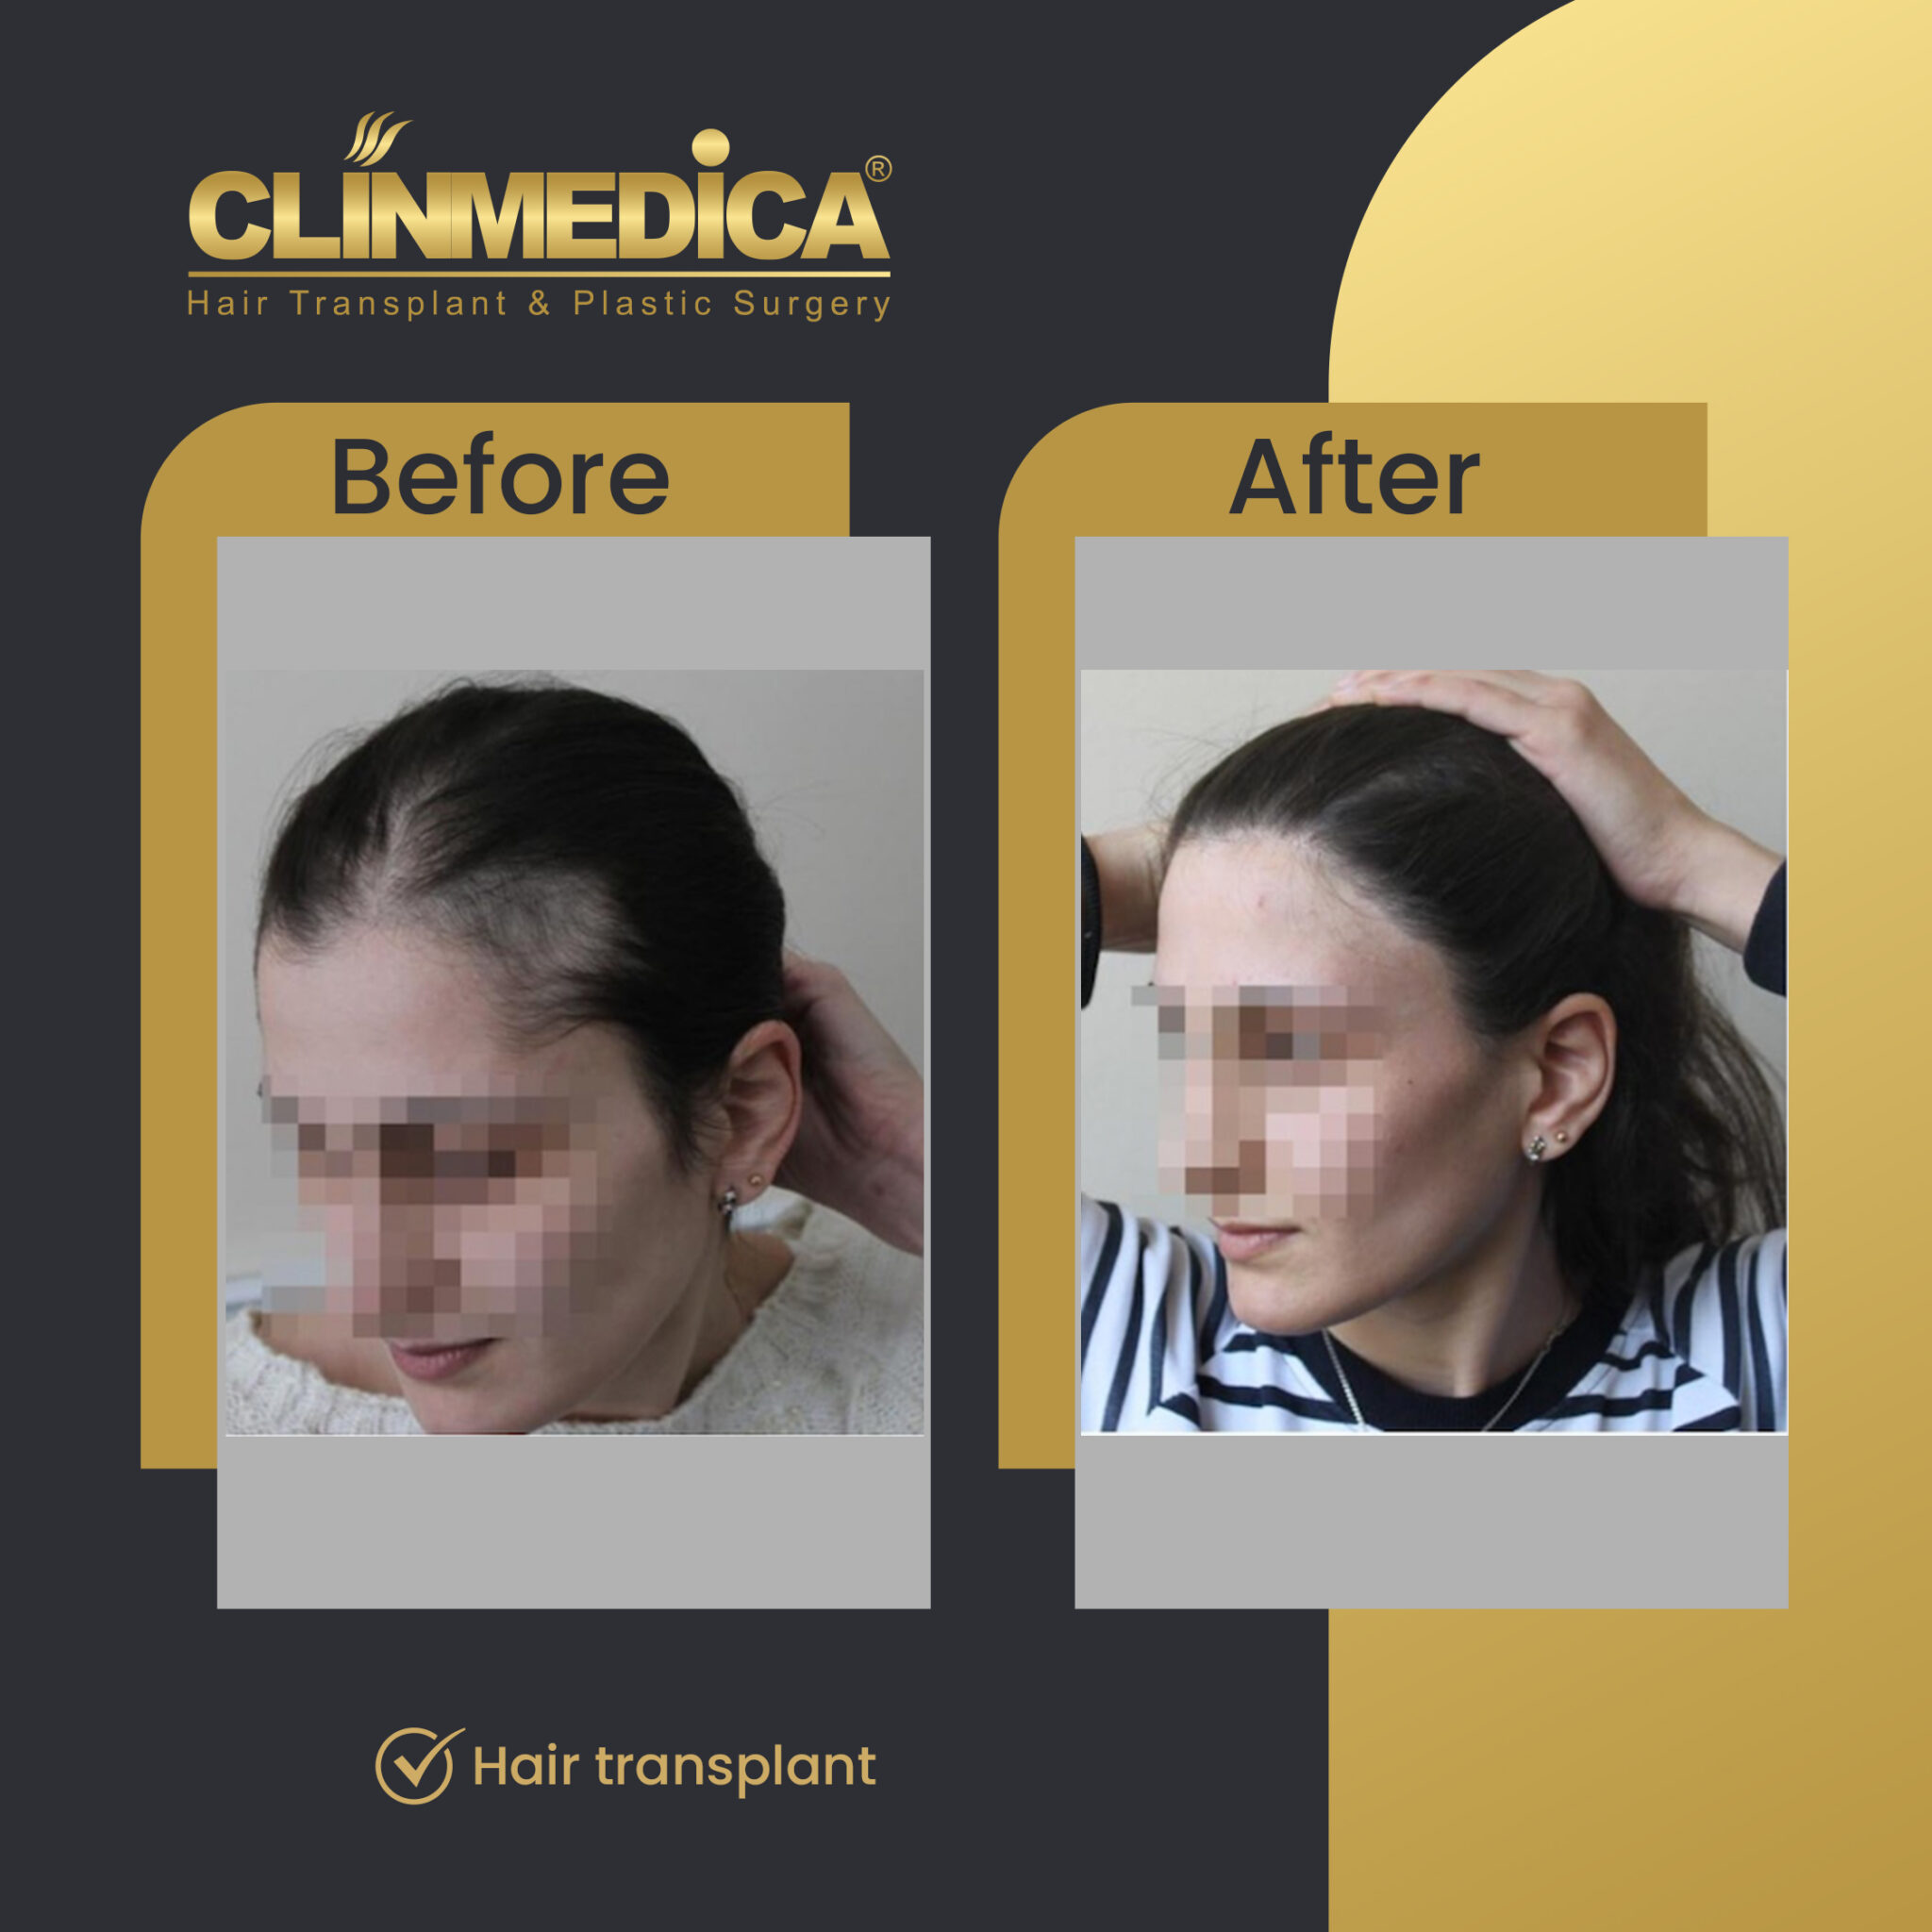 Hair-Transplant-for-women-Before-&-After-clinmedica-01